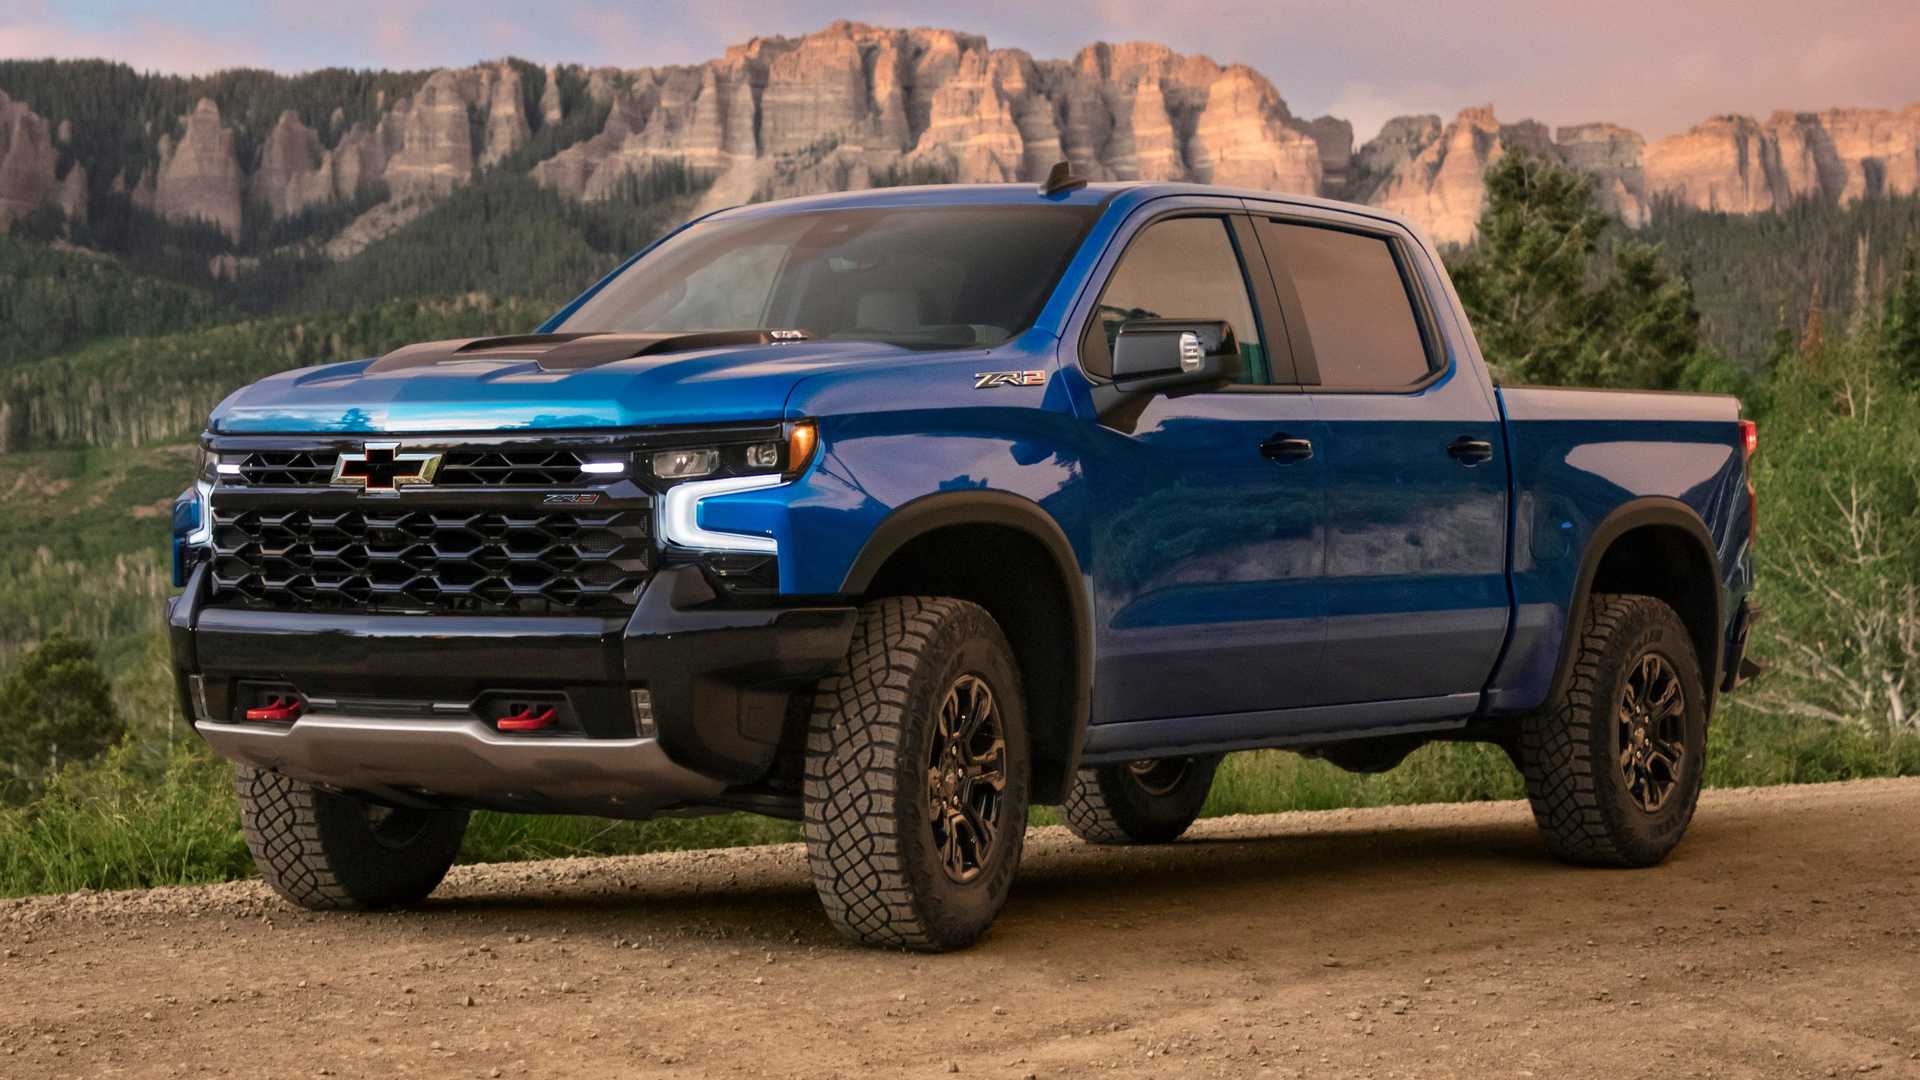 2022 Chevy Silverado Debuts With New Styling, Off Road ZR2 Model